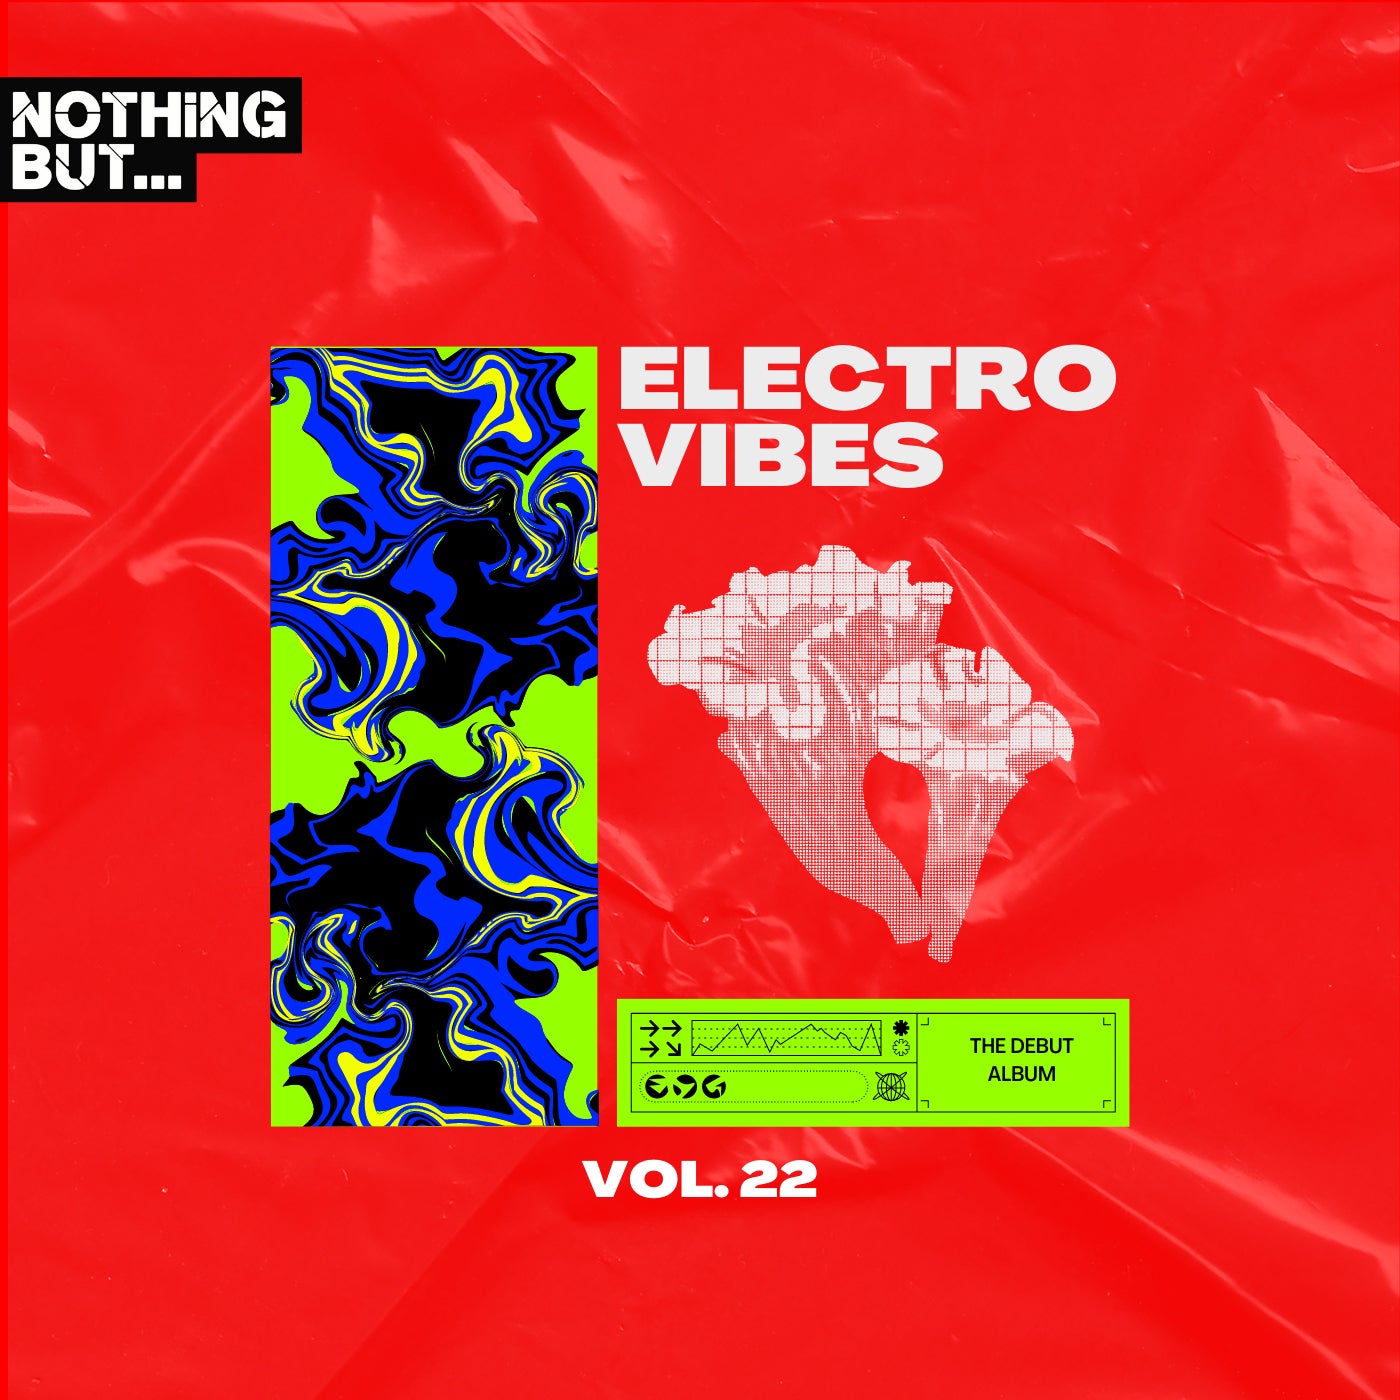 Nothing But... Electro Vibes, Vol. 22